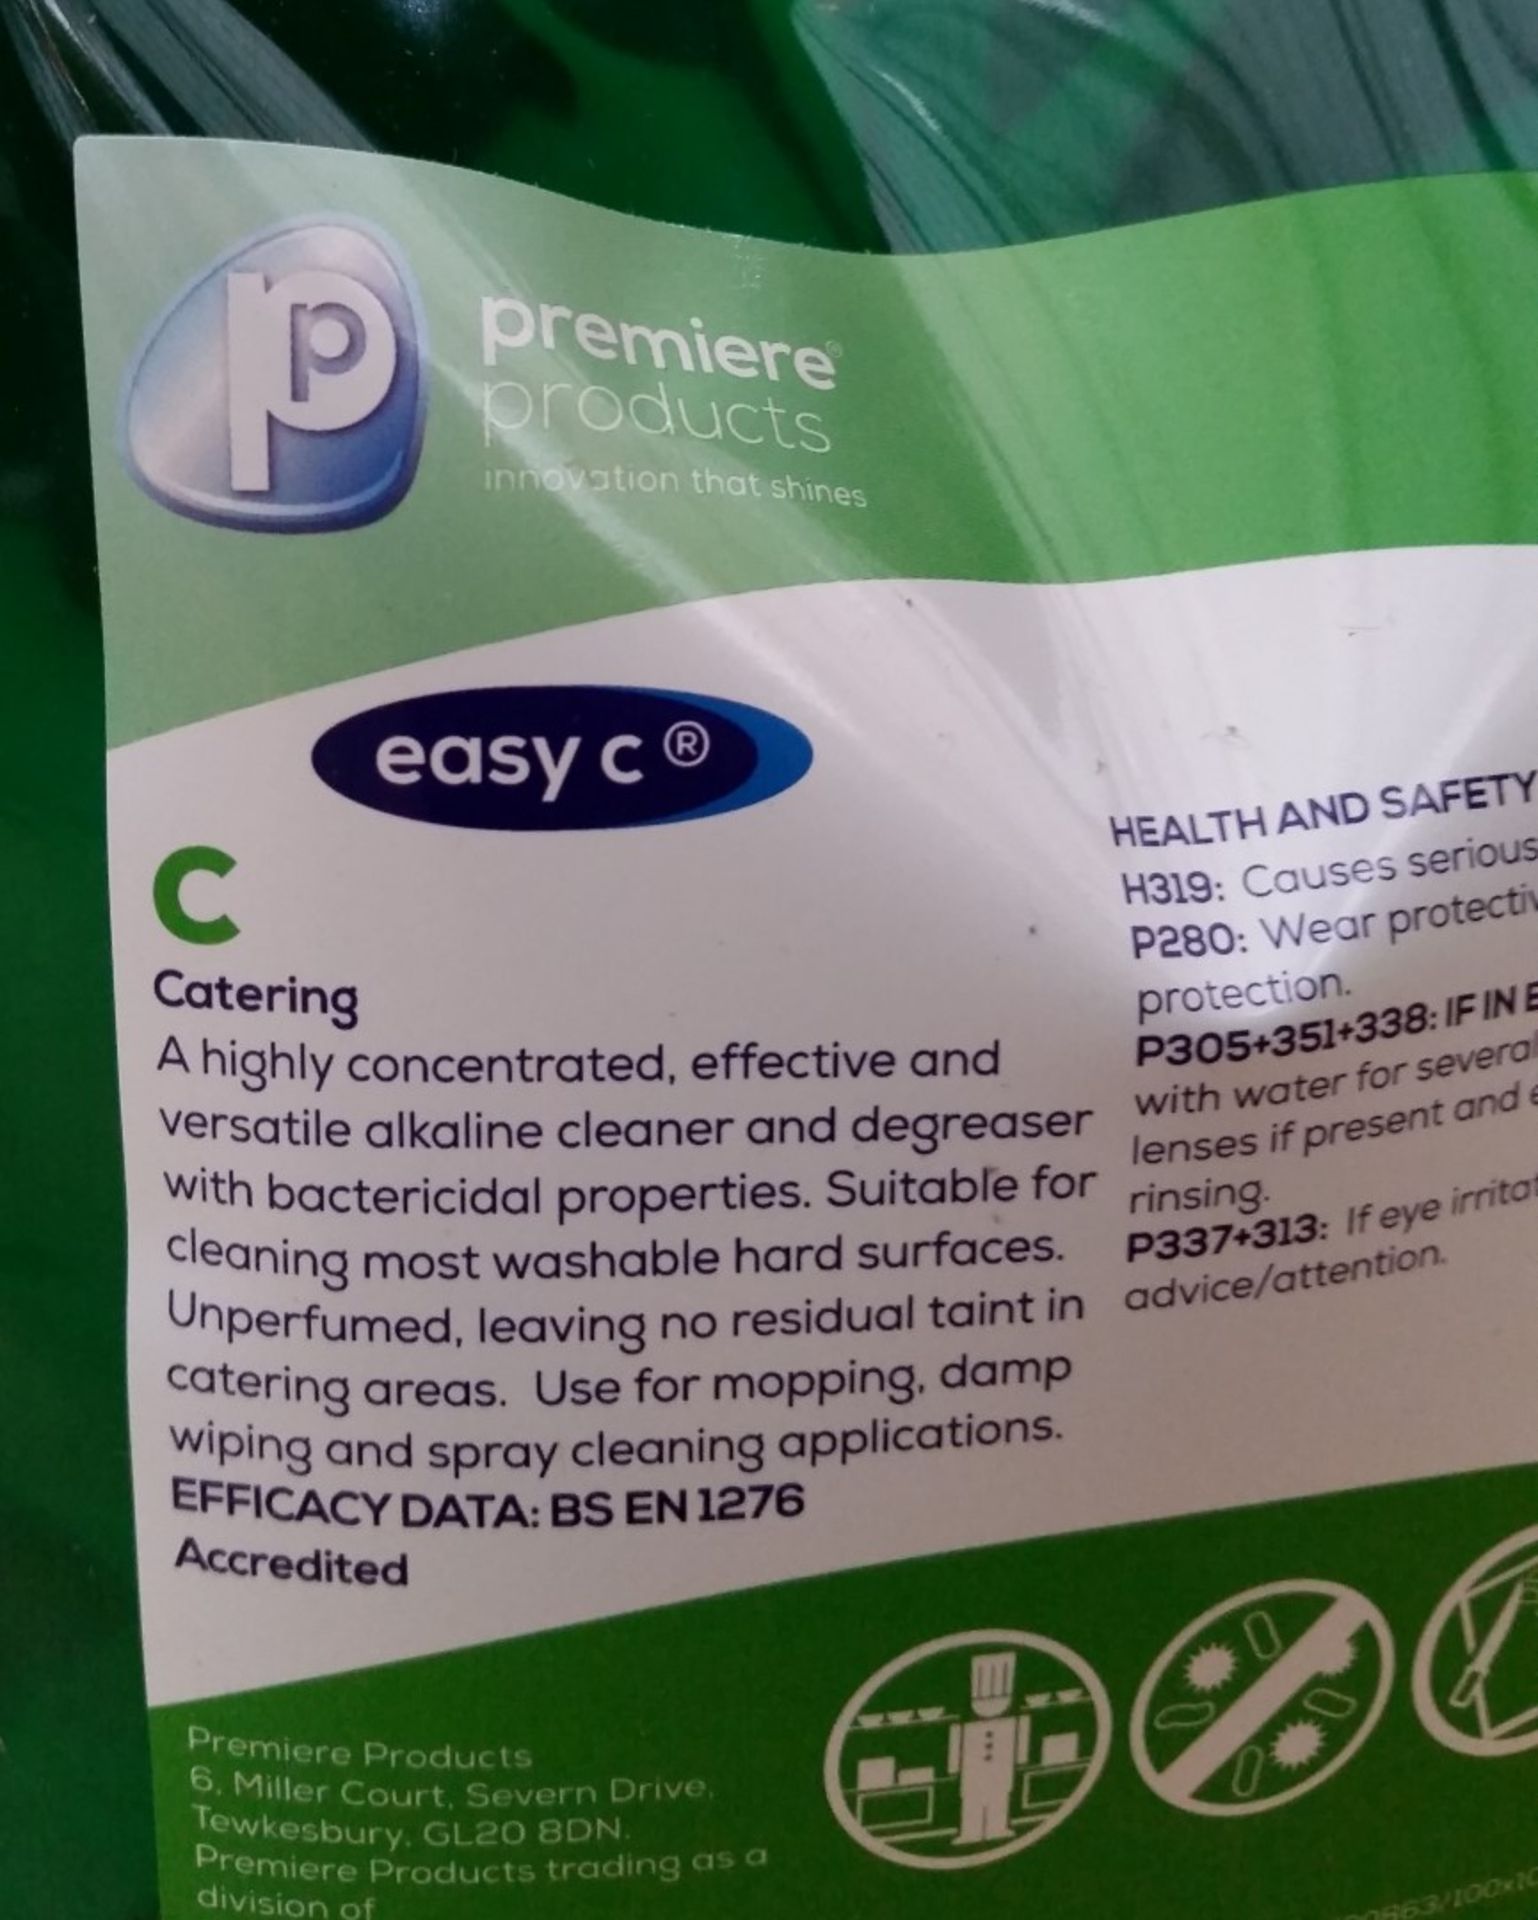 20 x Premiere 1.7 Litre Easy C (Catering) Alkaline Cleaner and Degreaser With Bacterial Properties - - Image 3 of 4